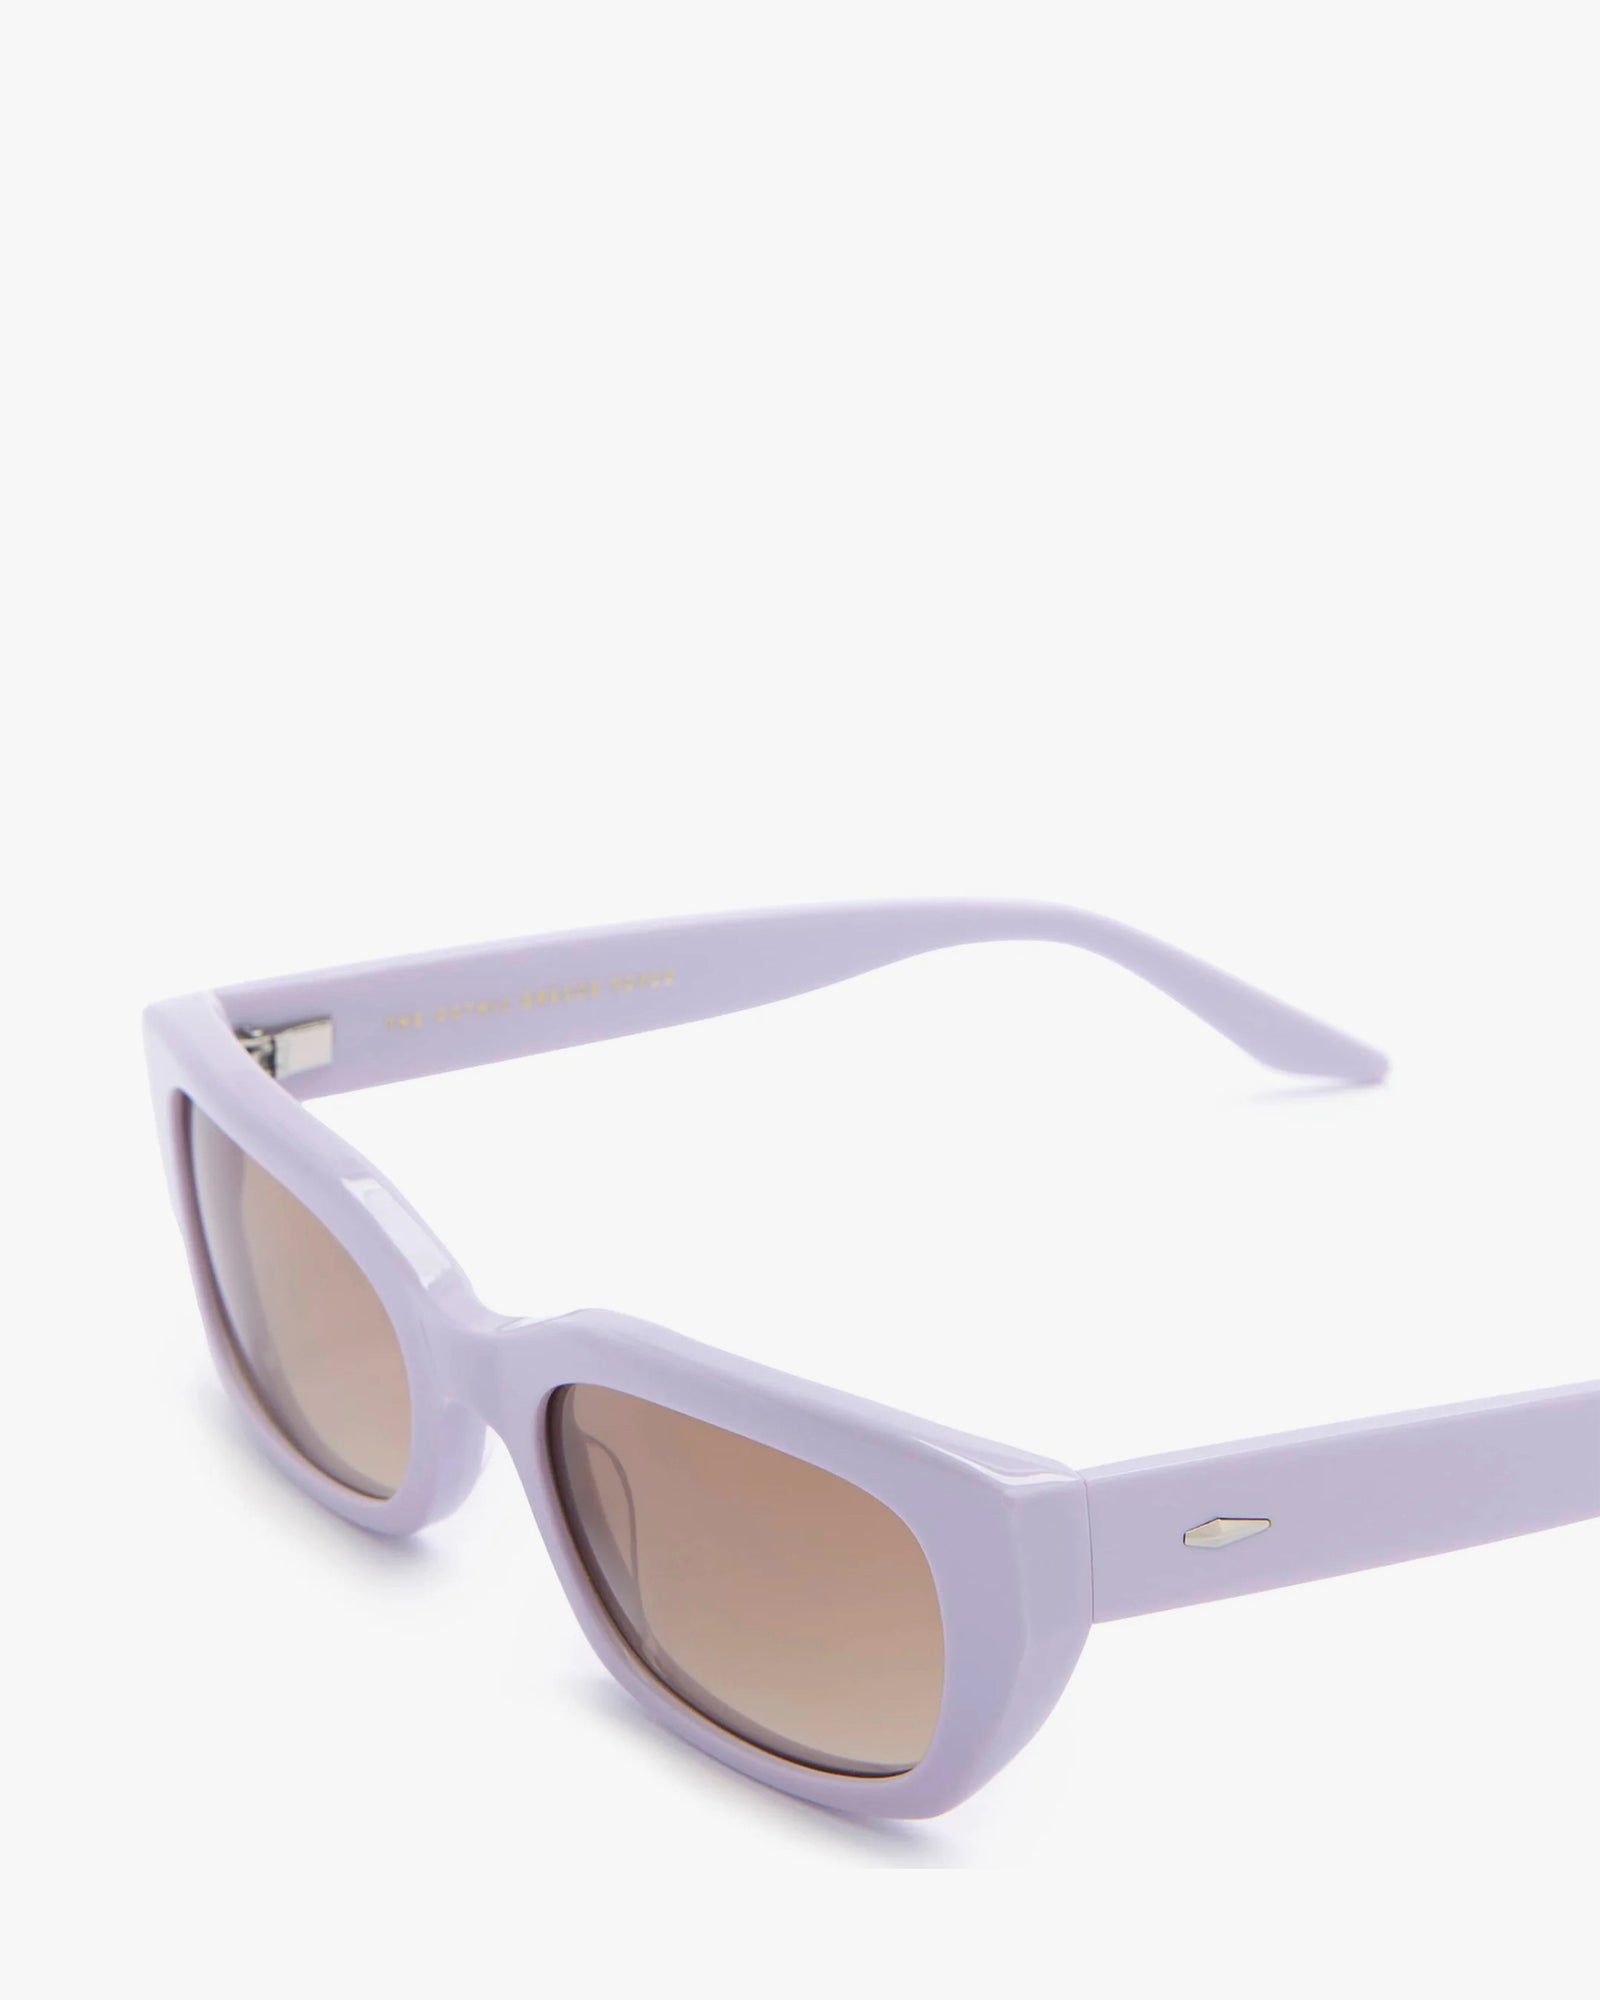 close up view of the arms on the Lavender Milk Gothic Breeze Sunglasses from CRAP Eyewear